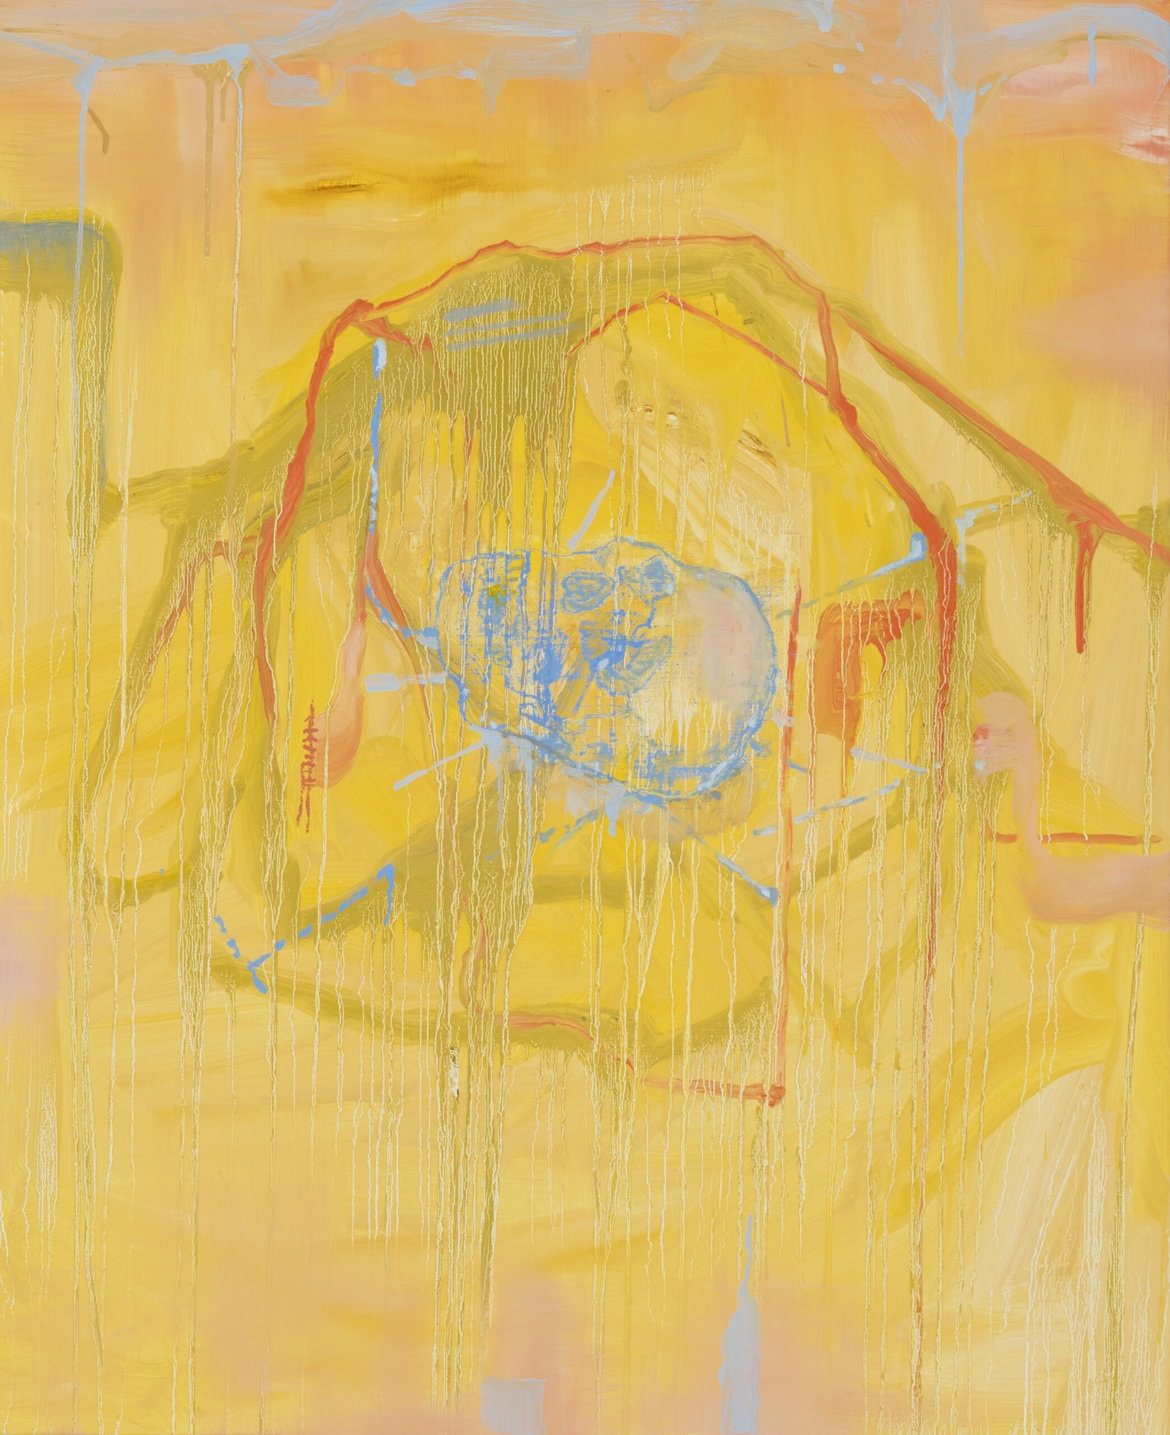 'Ear of Dionysius 9', 2022, oil and acrylic on Belgian linen, 110 x 90cm